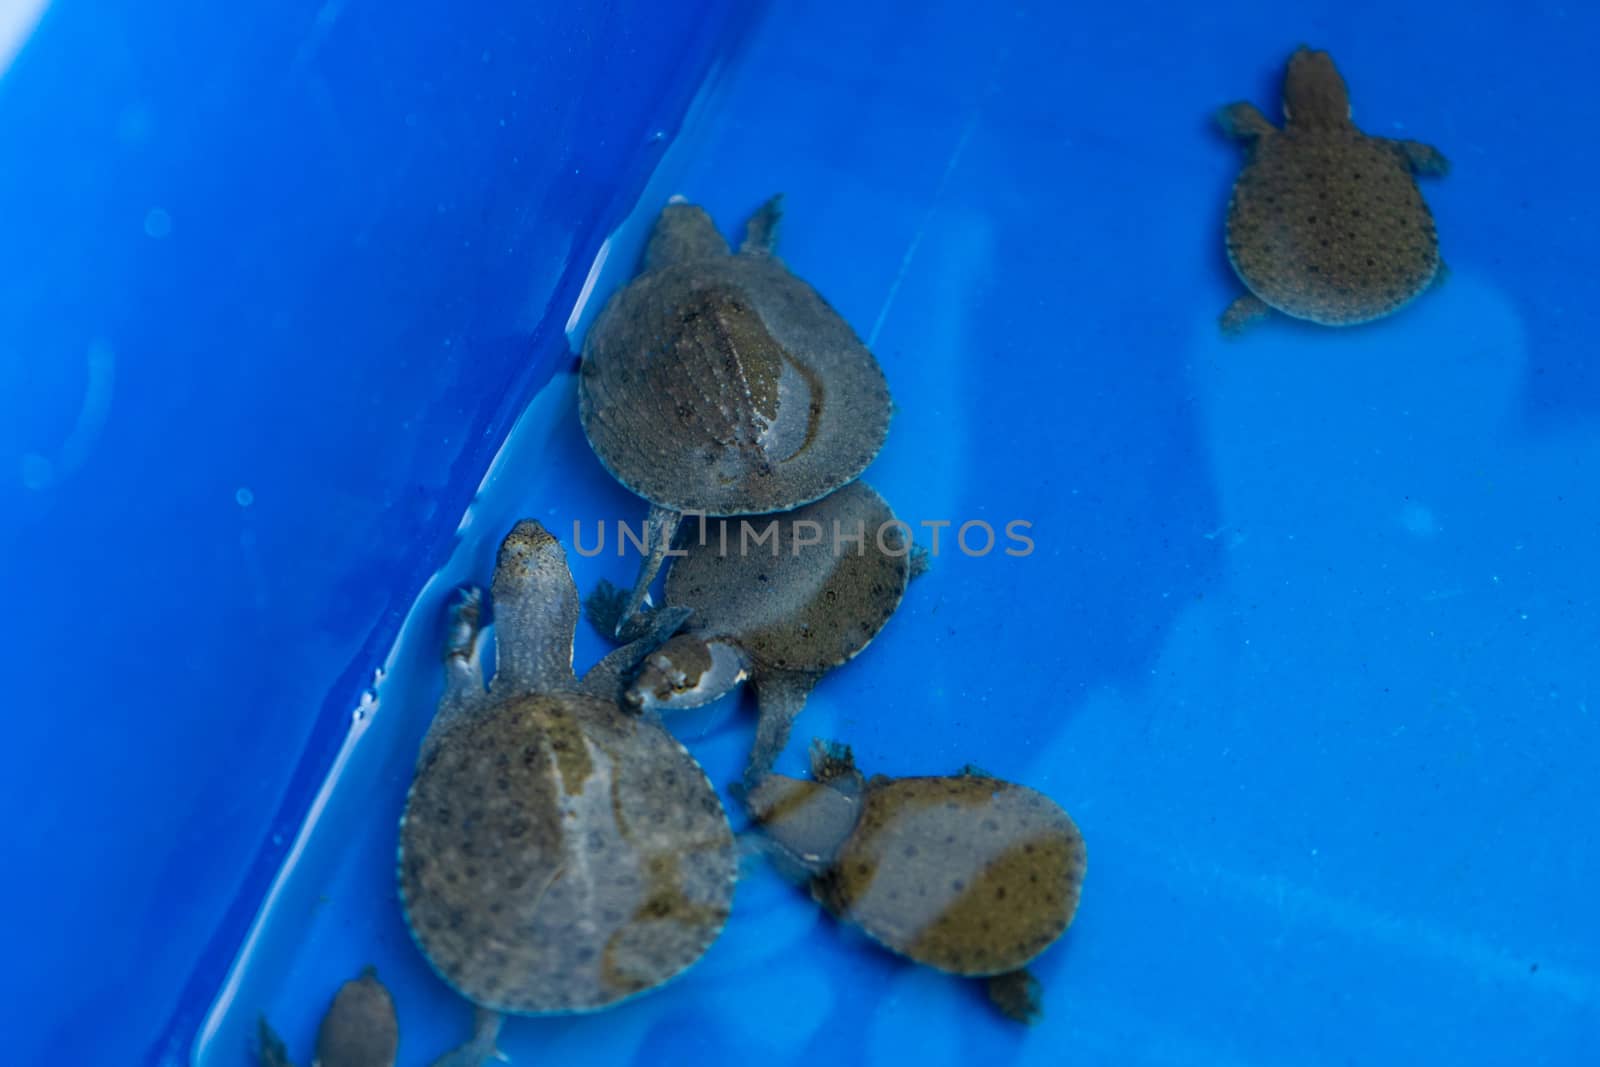 Turtles in a blue basin. Turtles will be released. Rescued turtles by Try_my_best